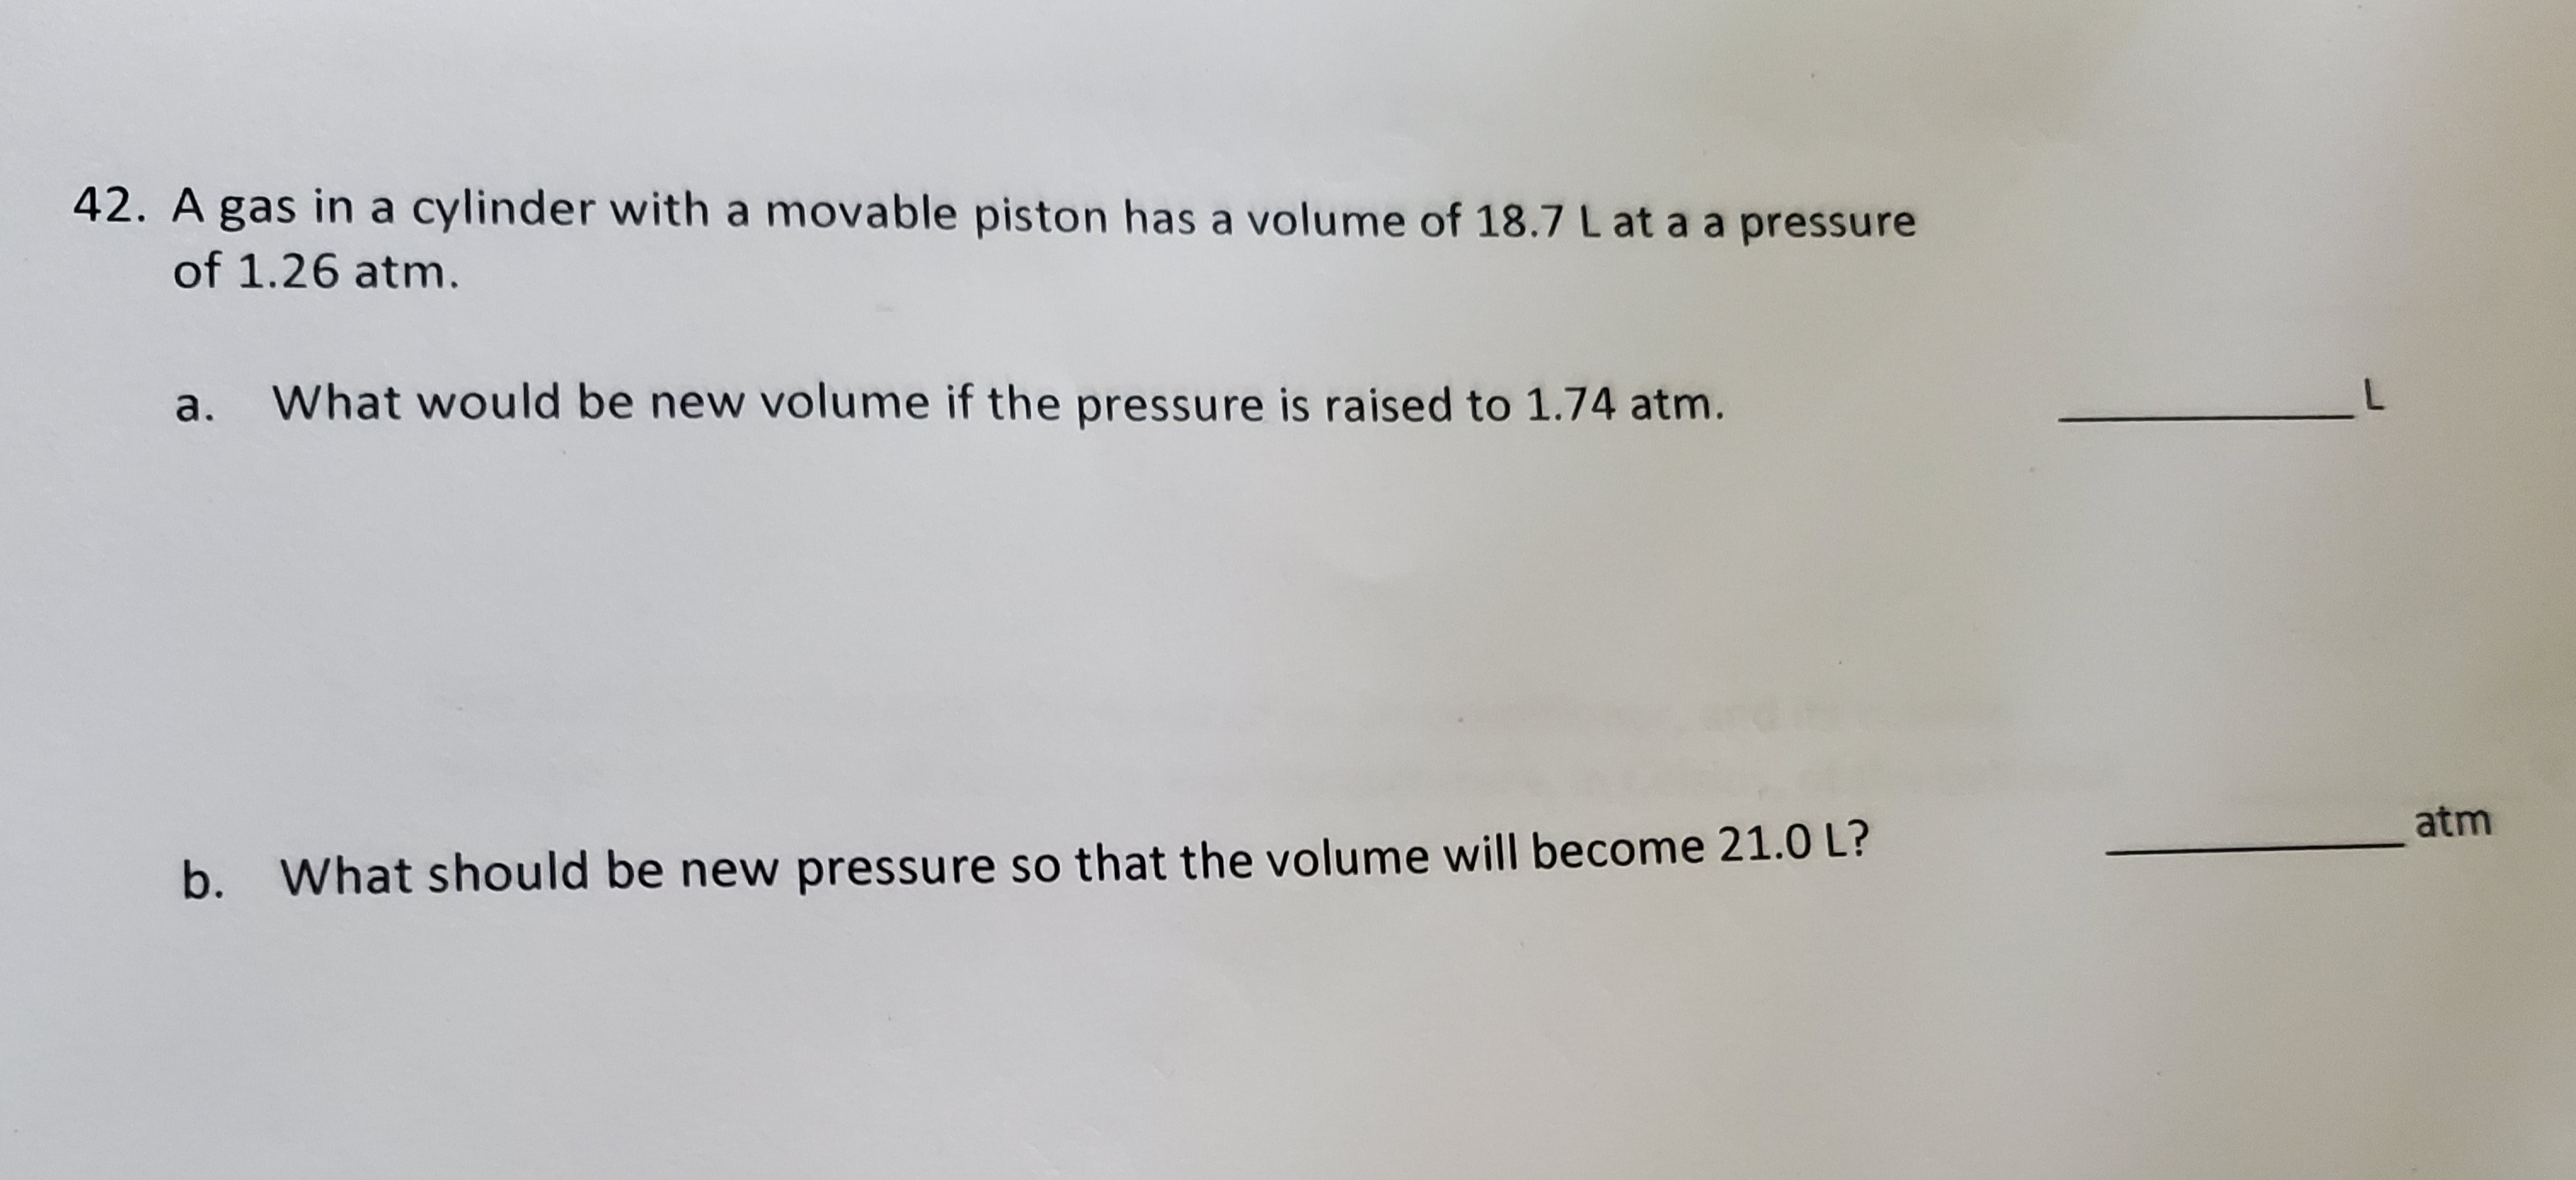 A gas in a cylinder with a movable piston has a volume of 18.7 L at a a pressure
of 1.26 atm.
a. What would be new volume if the pressure is raised to 1.74 atm.
atm
b. What should be new pressure so that the volume will become 21.0 L?
